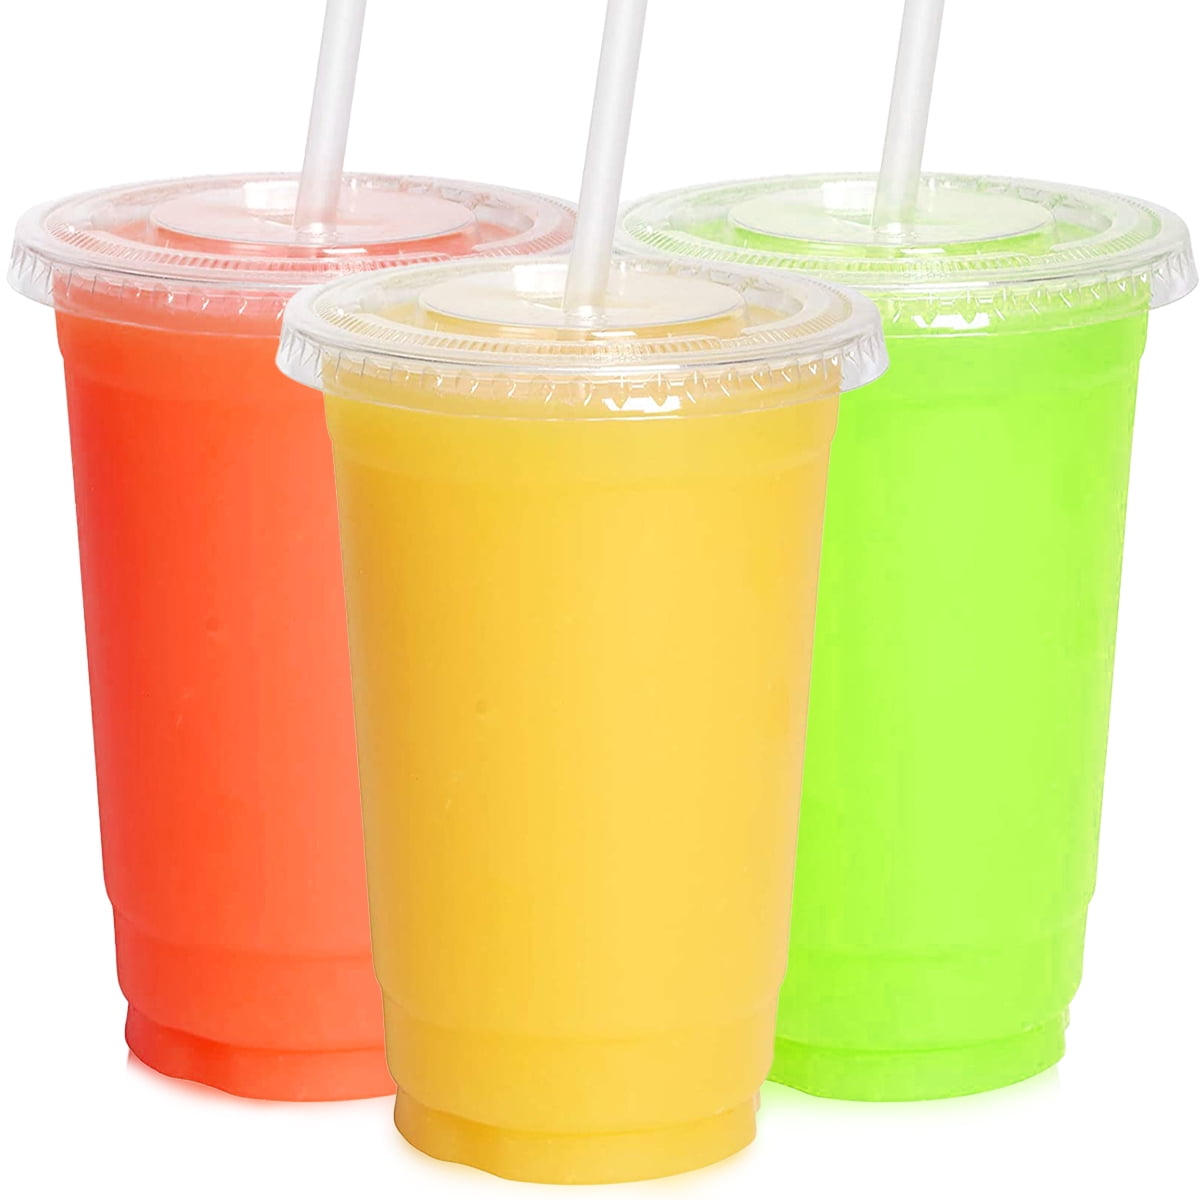 SMOOTHIE/DRINKS/SLUSHES DISPOSABLE CUPS WITH LIDS 